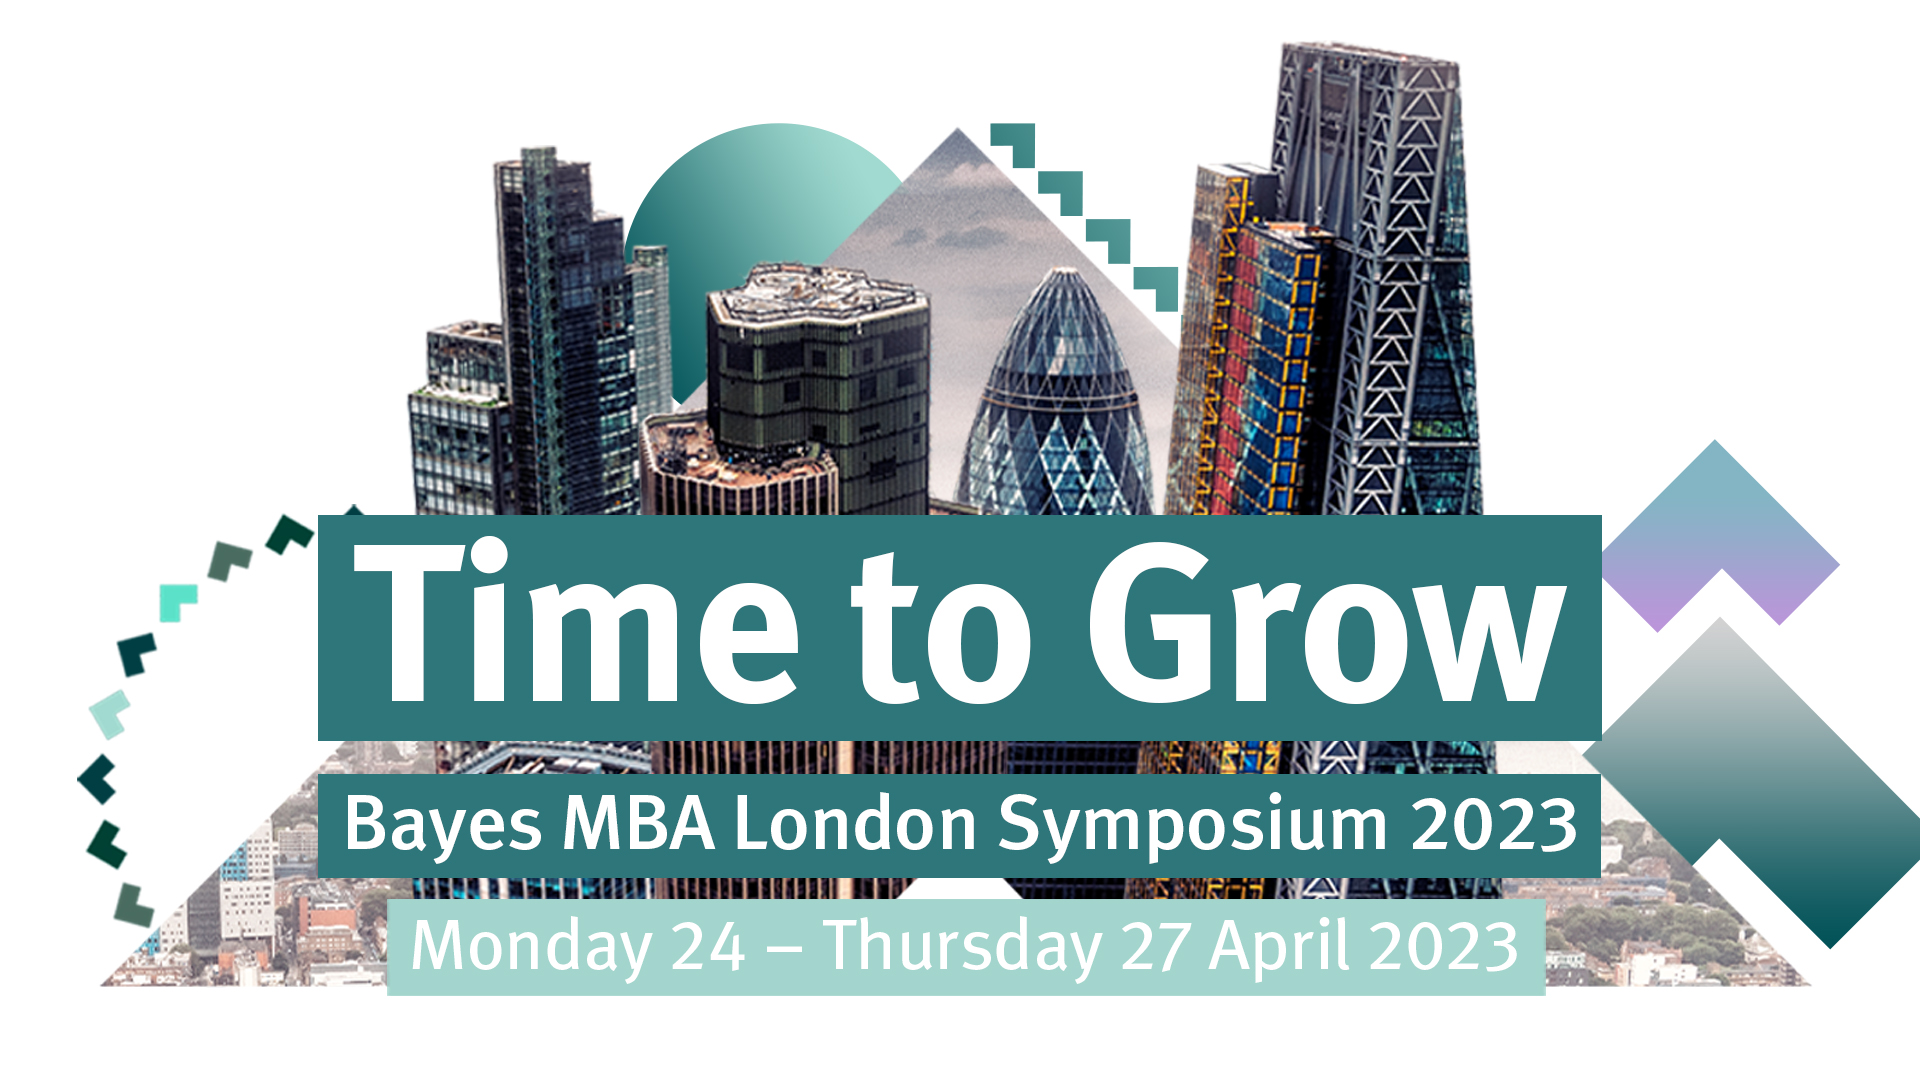 Time to Grow, Bayes MBA Symposium 2023, Monday 24th to Thursday 27th April